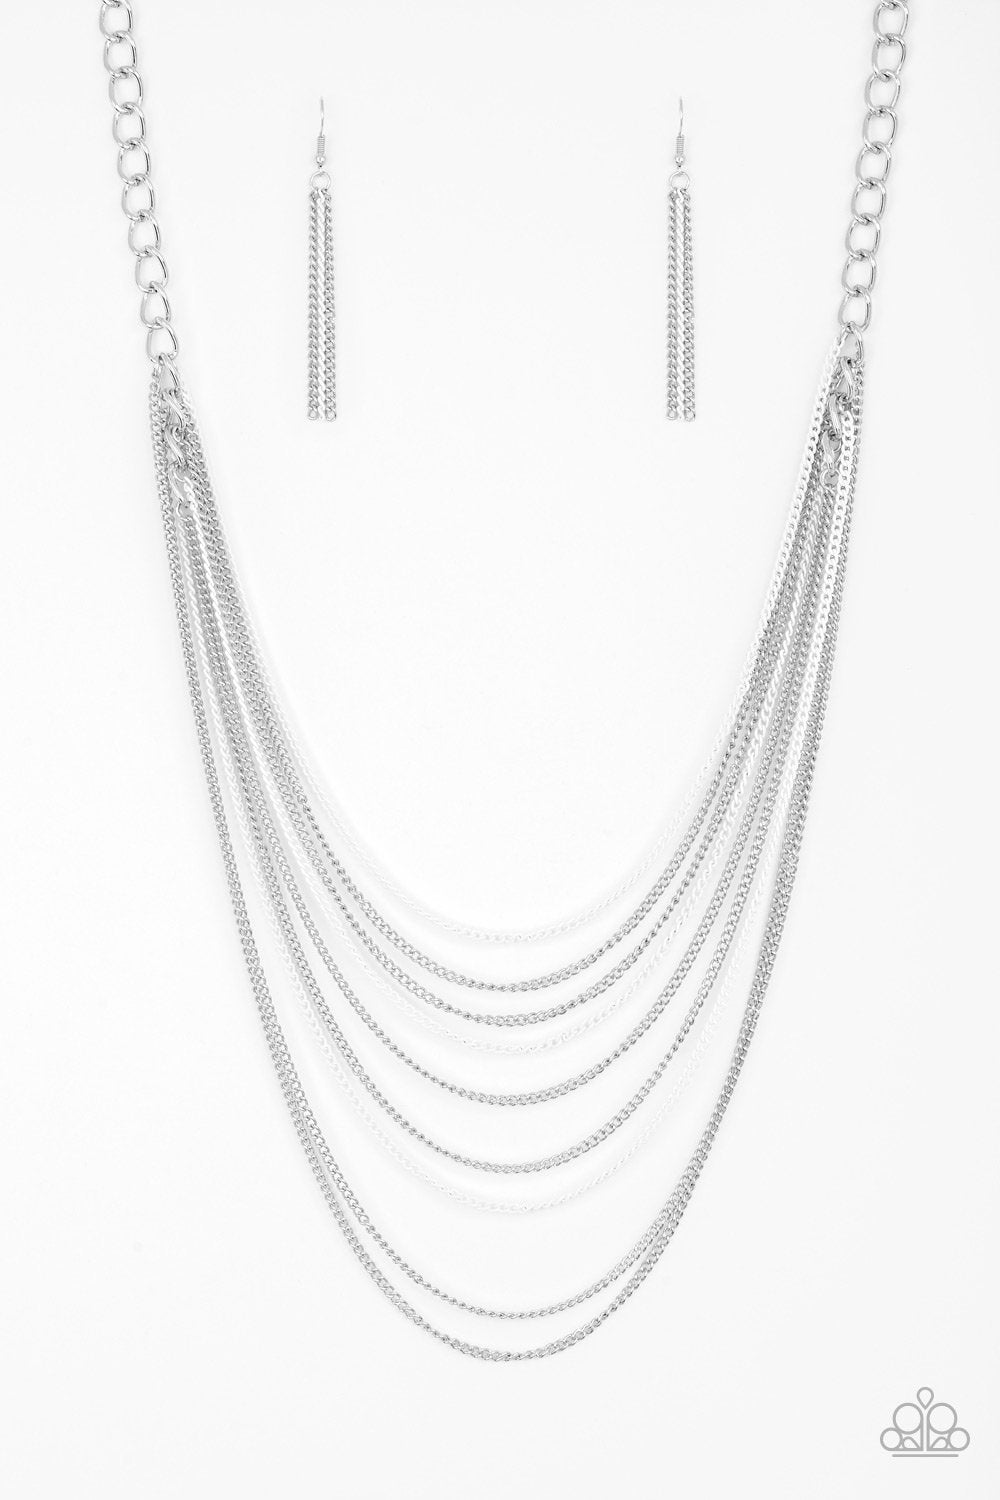 Rebel Rainbow White and Silver Chain Necklace - Paparazzi Accessories-CarasShop.com - $5 Jewelry by Cara Jewels